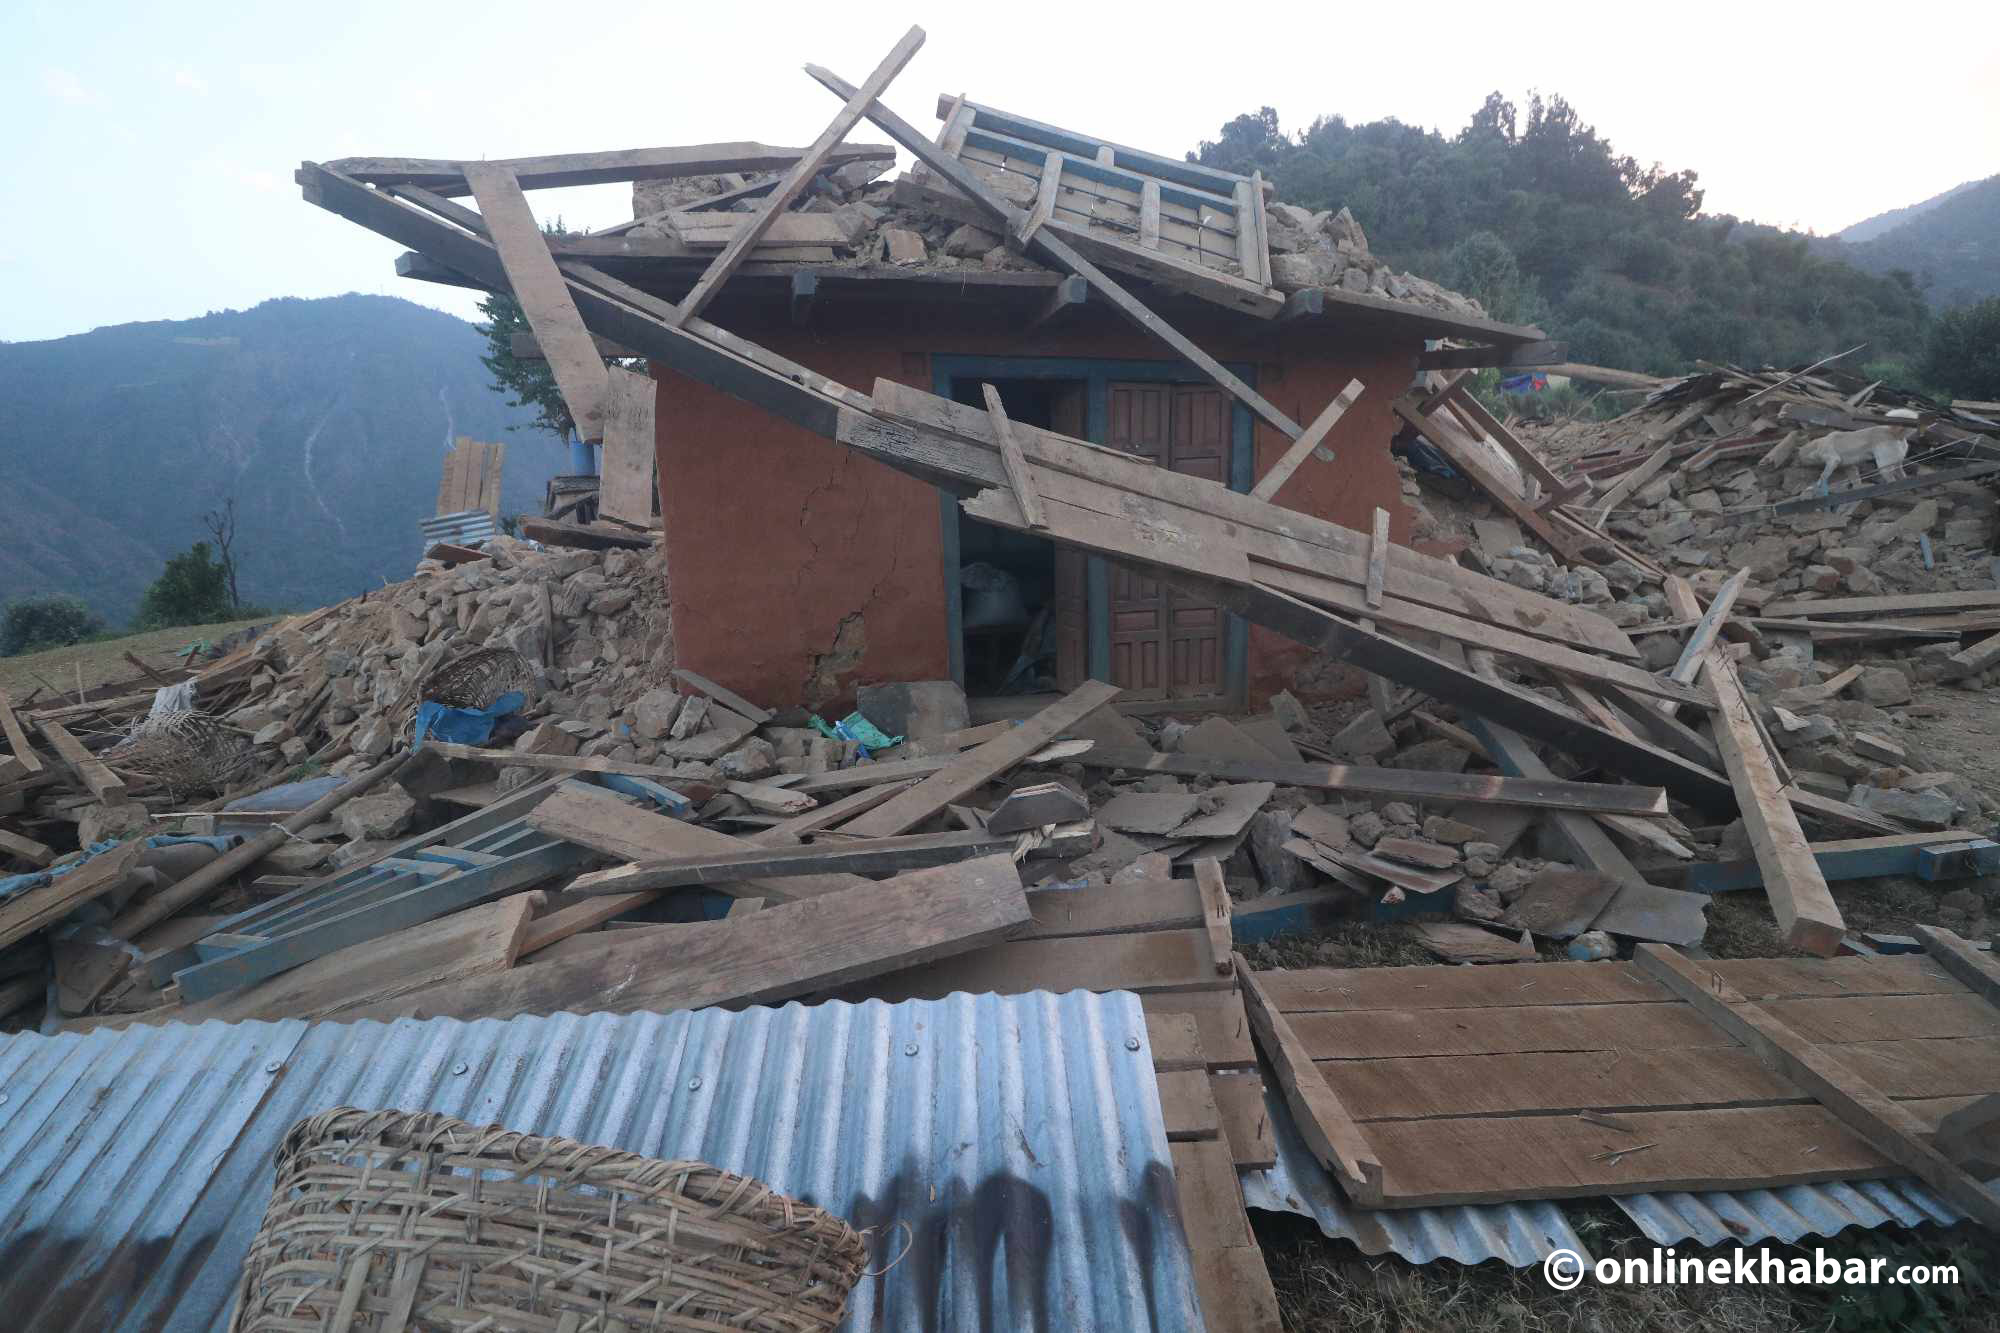 Security personnel to be mobilised to build temporary shelters for earthquake victims